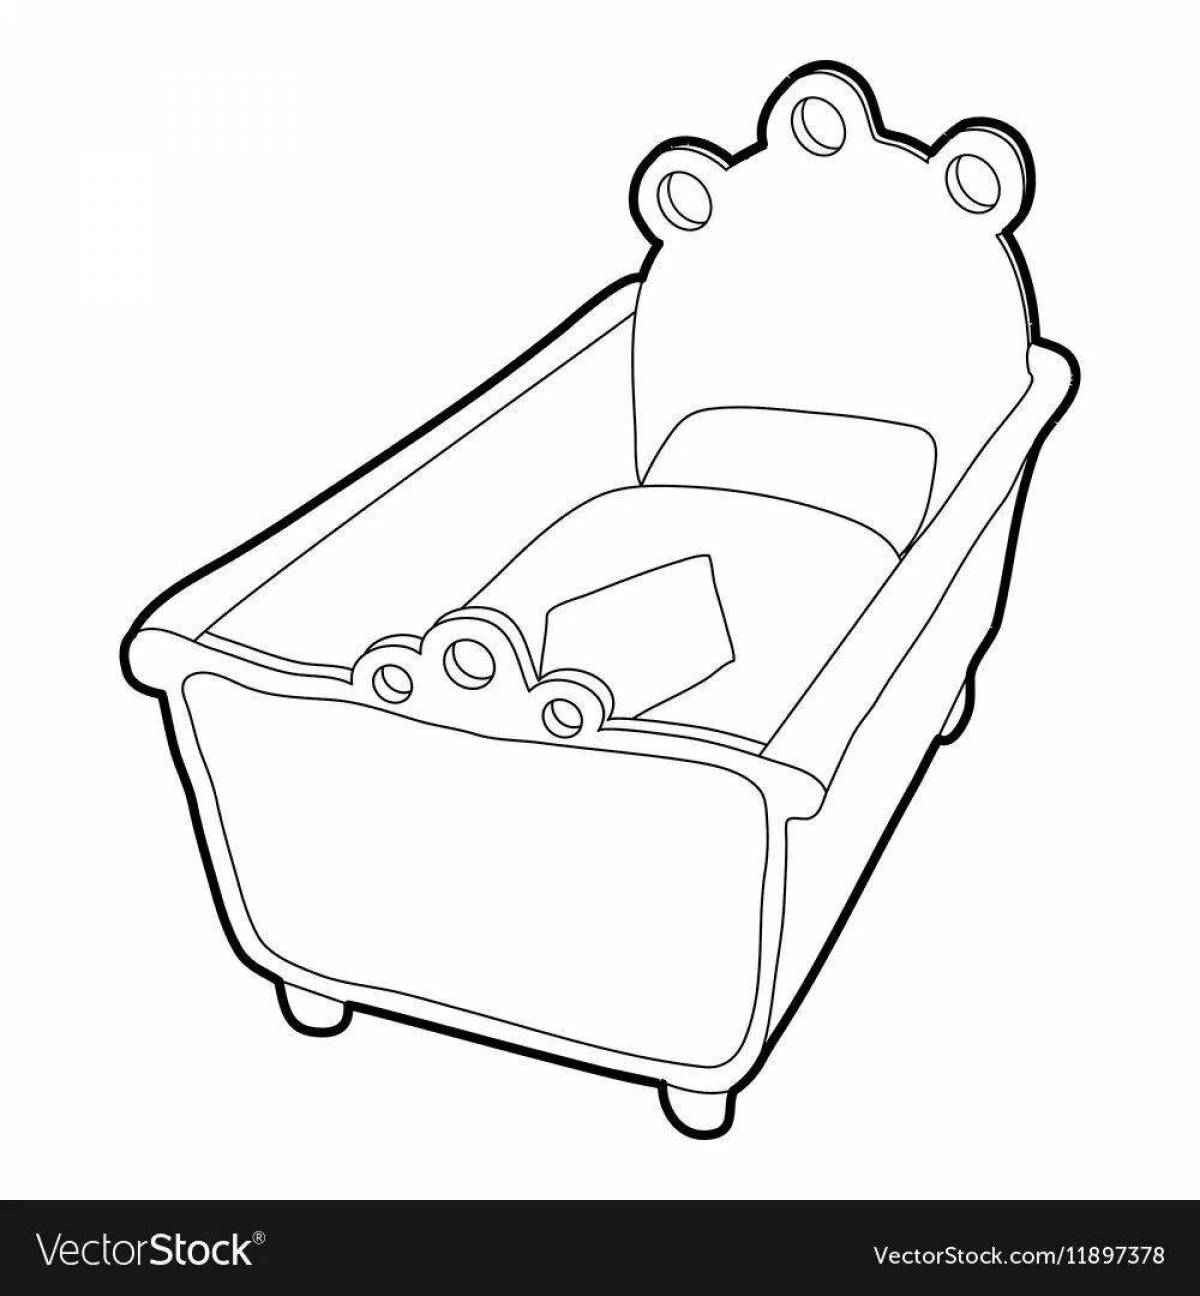 Great coloring book for baby bed